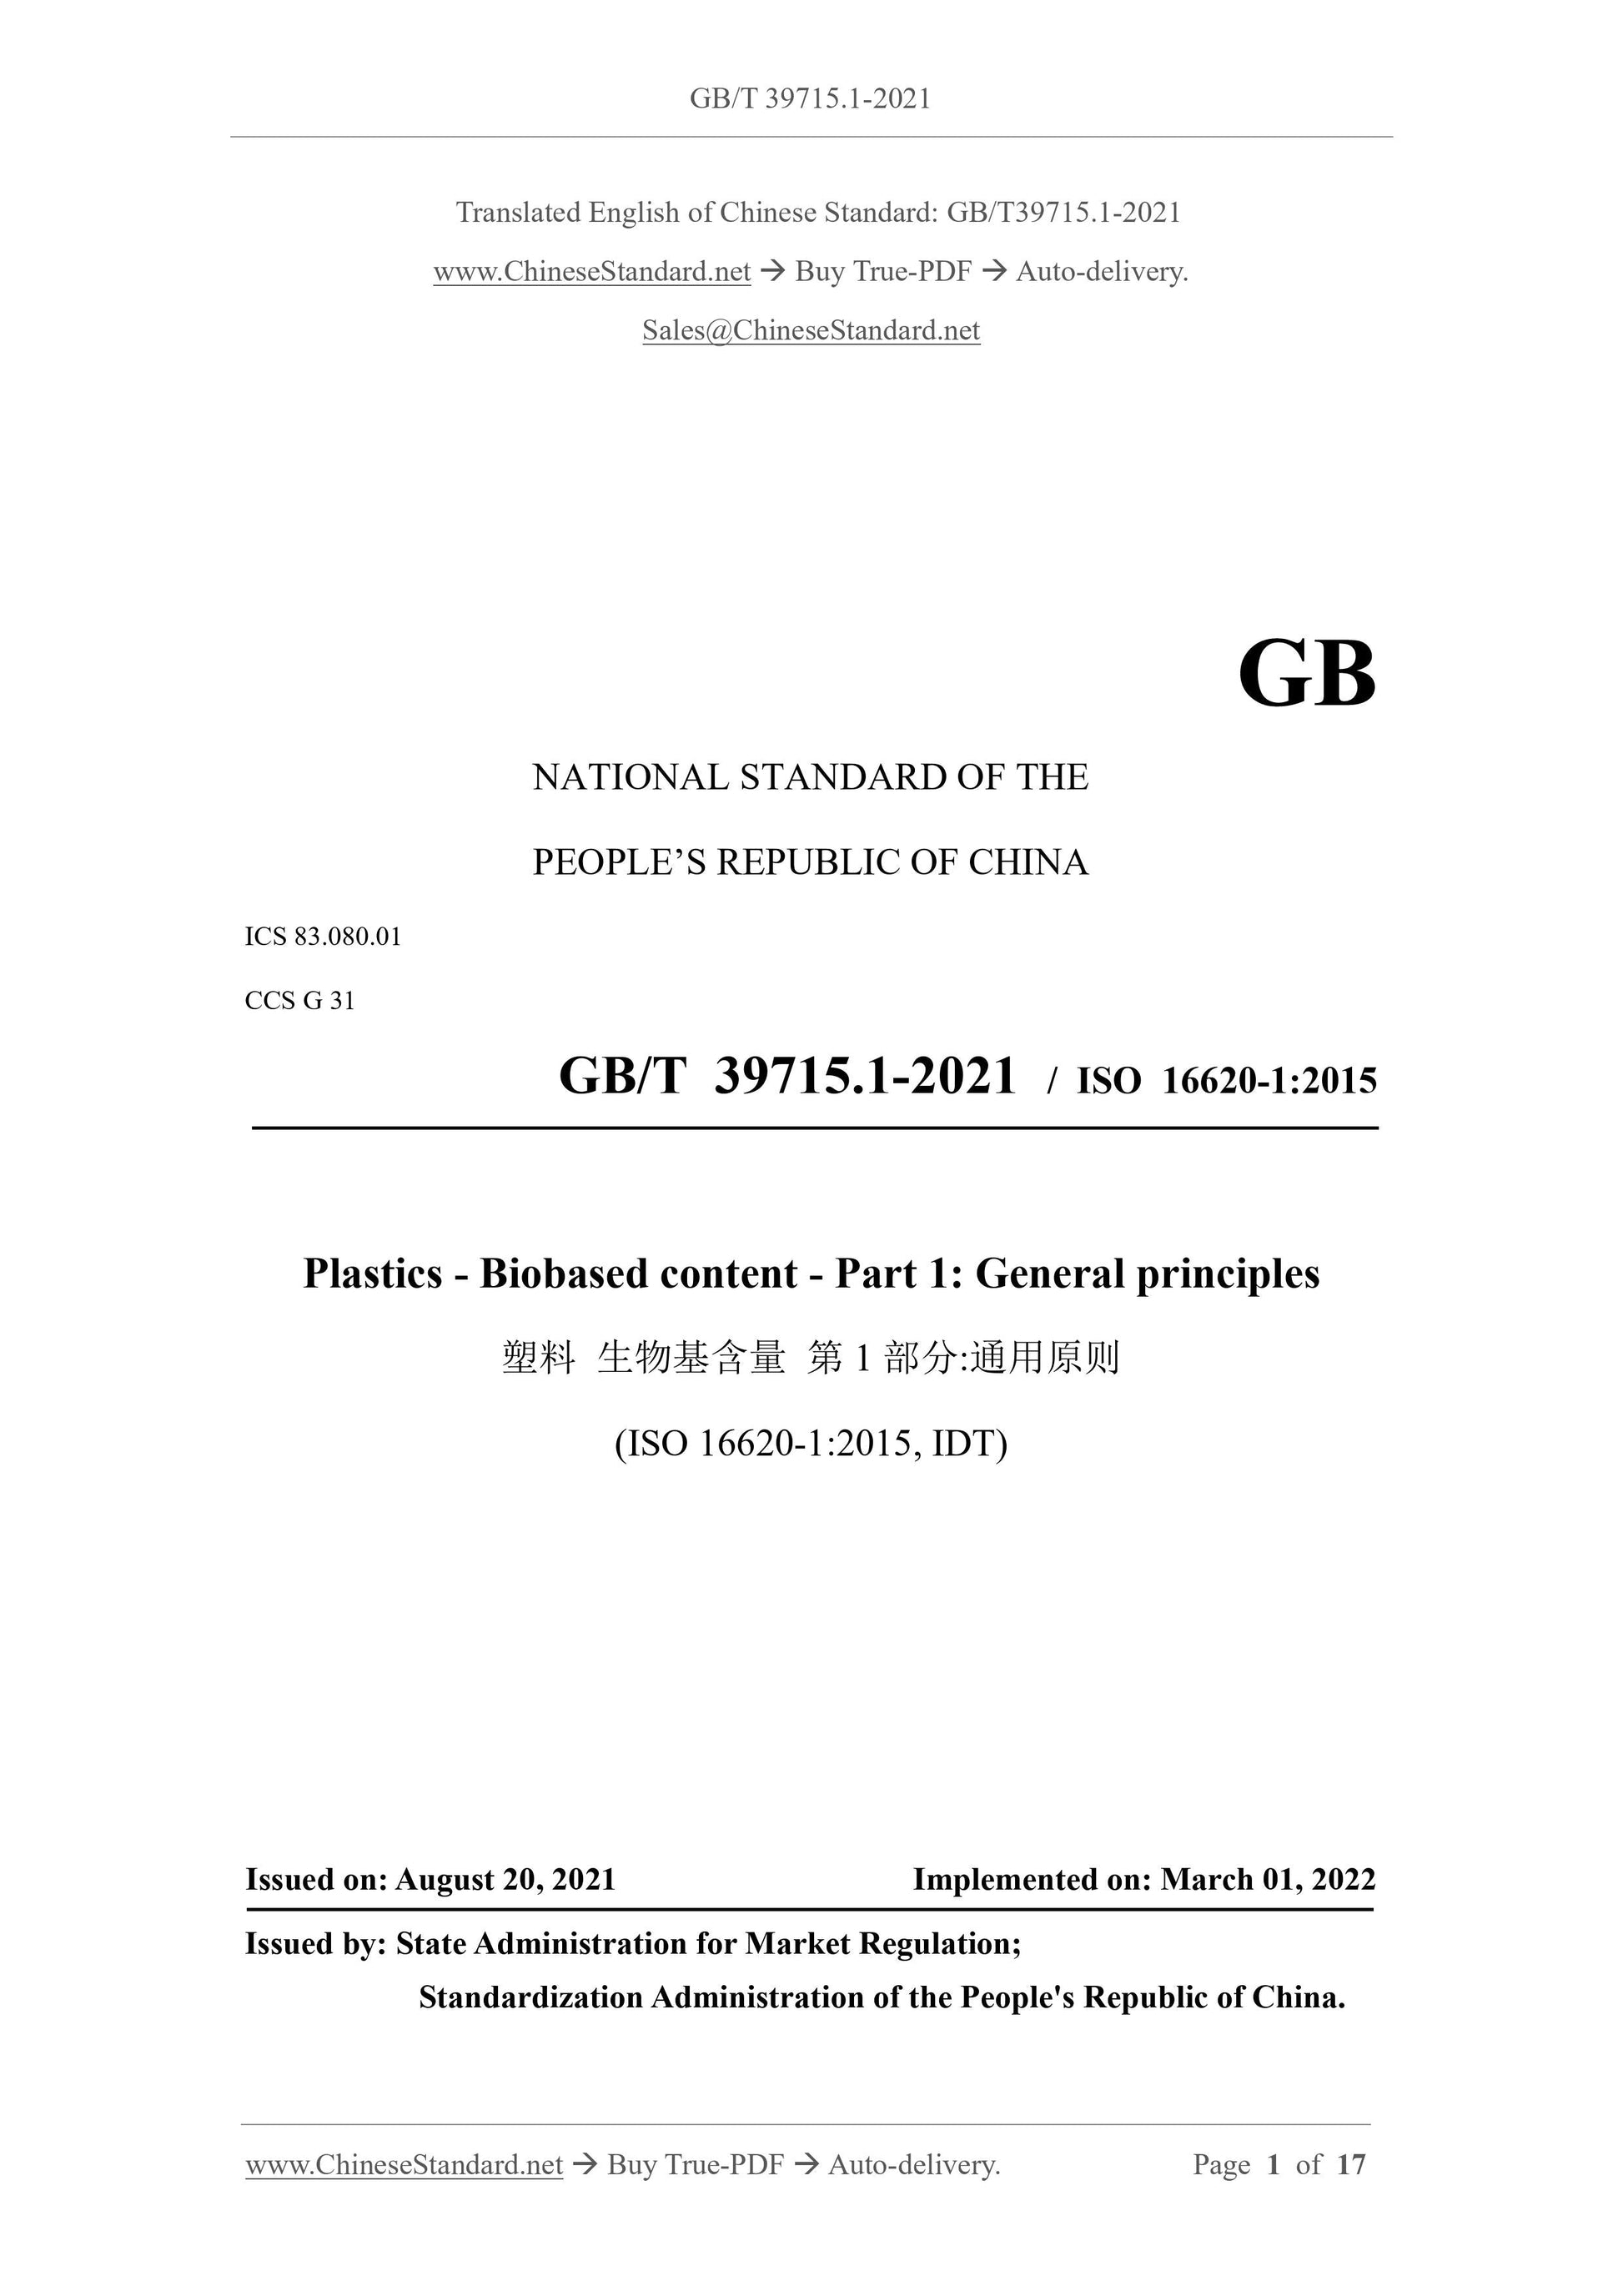 GB/T 39715.1-2021 Page 1